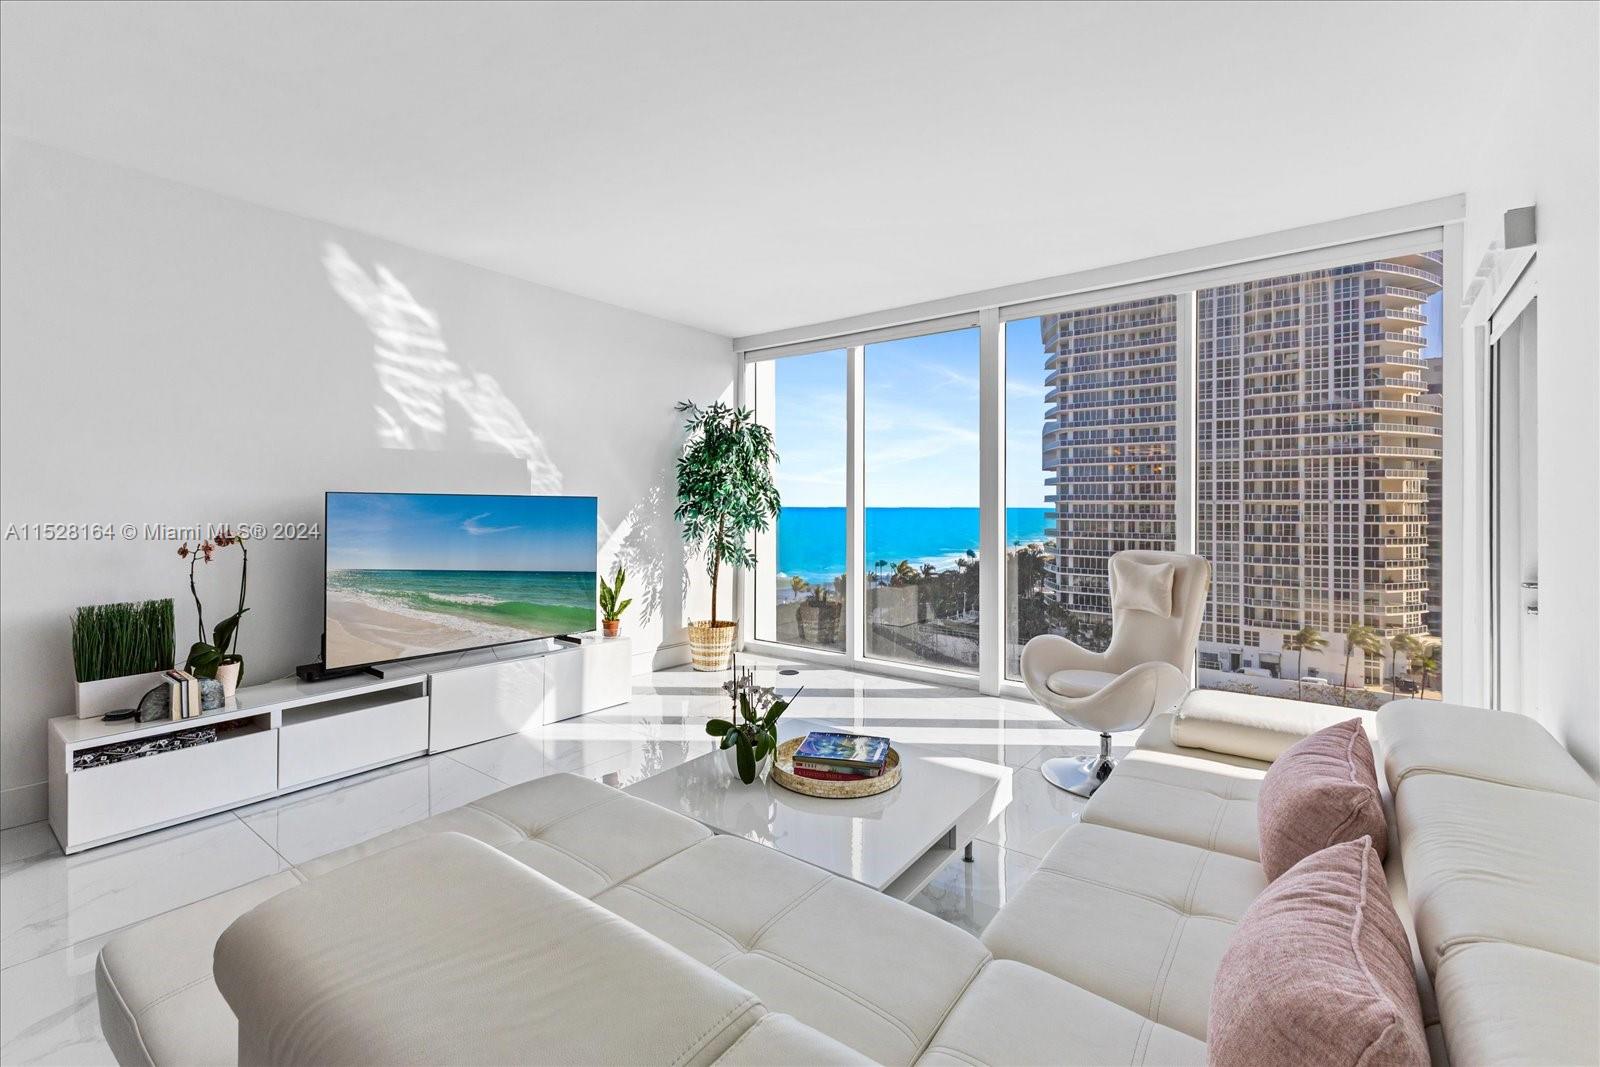 Beautifully renovated 1bed 1.5 baths with southern exposure. Tranquil ocean views and views of the Miami Skyline from this bright and spacious 900/SF unit featuring white porcelain floors throughout, new bathrooms, updated kitchen, new washer and dryer, closet built-ins. Large balcony with access from the living and bedroom. Unit comes fully furnished. Unit comes with 1 parking space. Full service building with beach service, fully equipped gym, Sardinia cafe, theater and social room, 24 hour security and valet. Contact Listing Agent for more information.